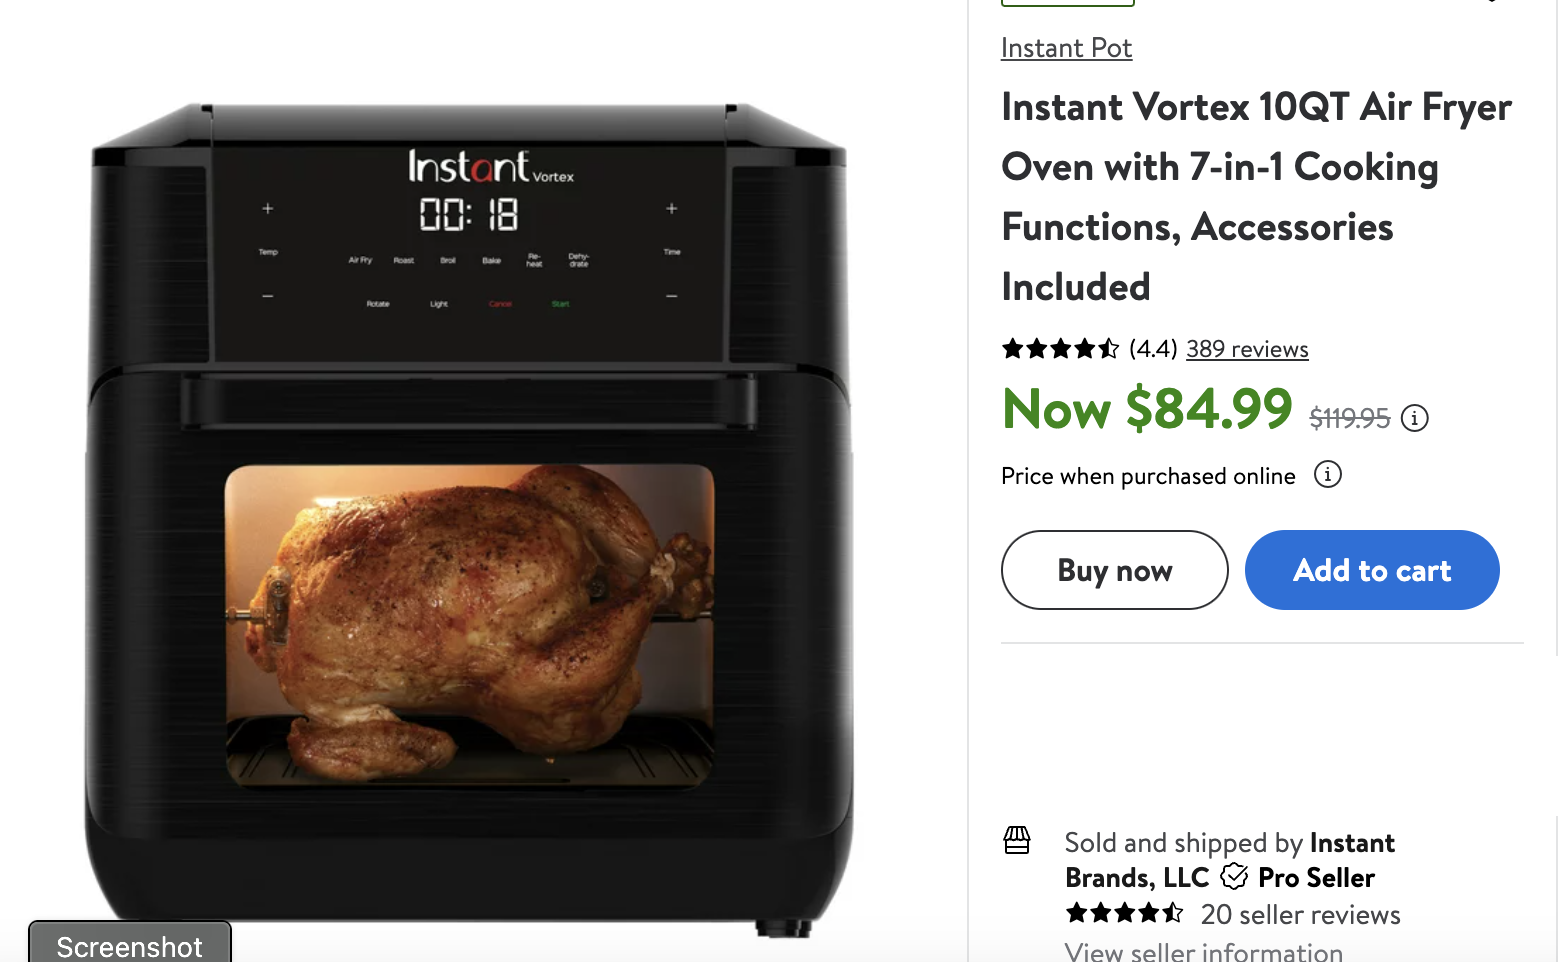 Instant Vortex 10QT Air Fryer Oven with 7-in-1 Cooking Functions, Accessories Included $84.99